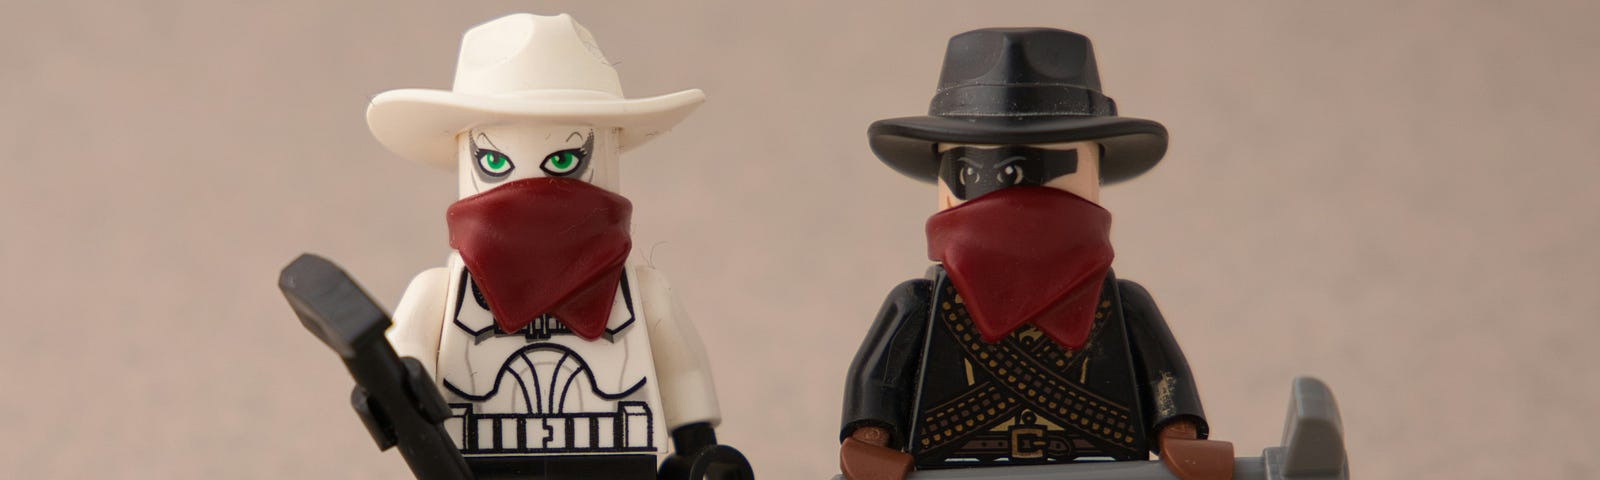 Two lego figures dressed like cowboys with bandanas over their faces